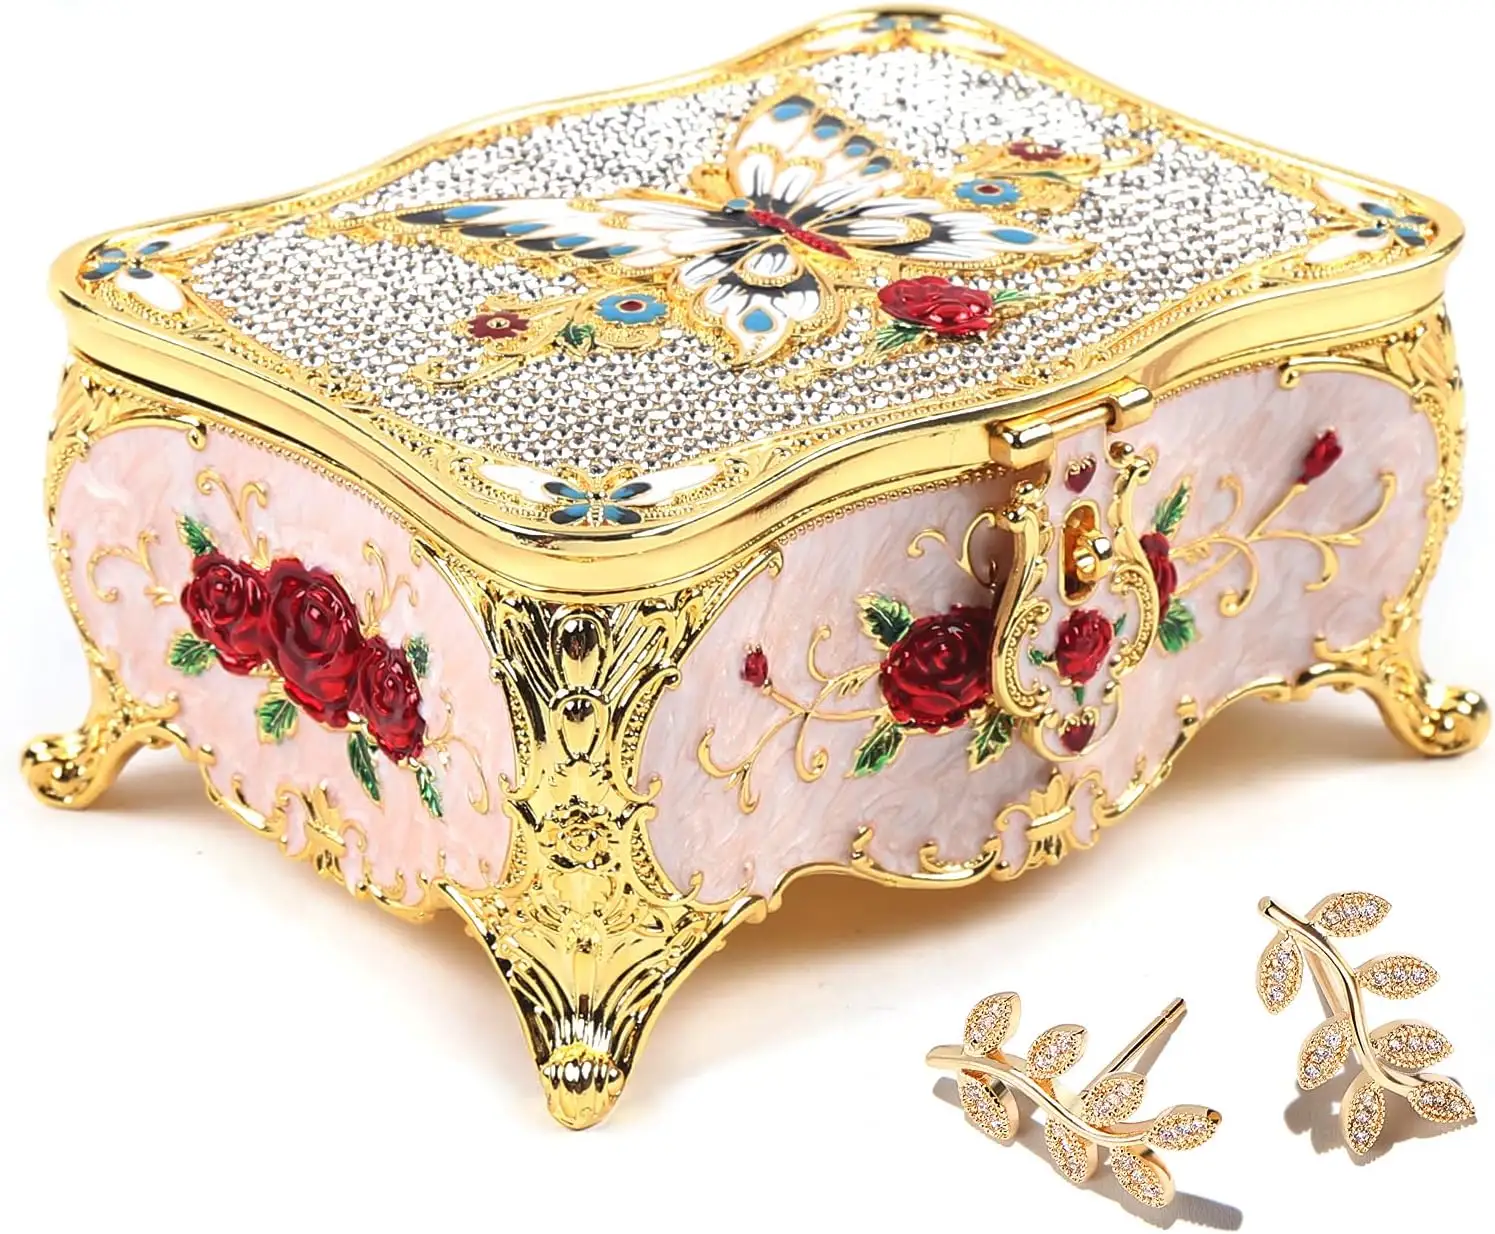 Big Size Vintage Flower Carved Jewelry Boxes Multi color with Stones Decor Necklace Pendant Rings Gifts box jewelry Storage Case